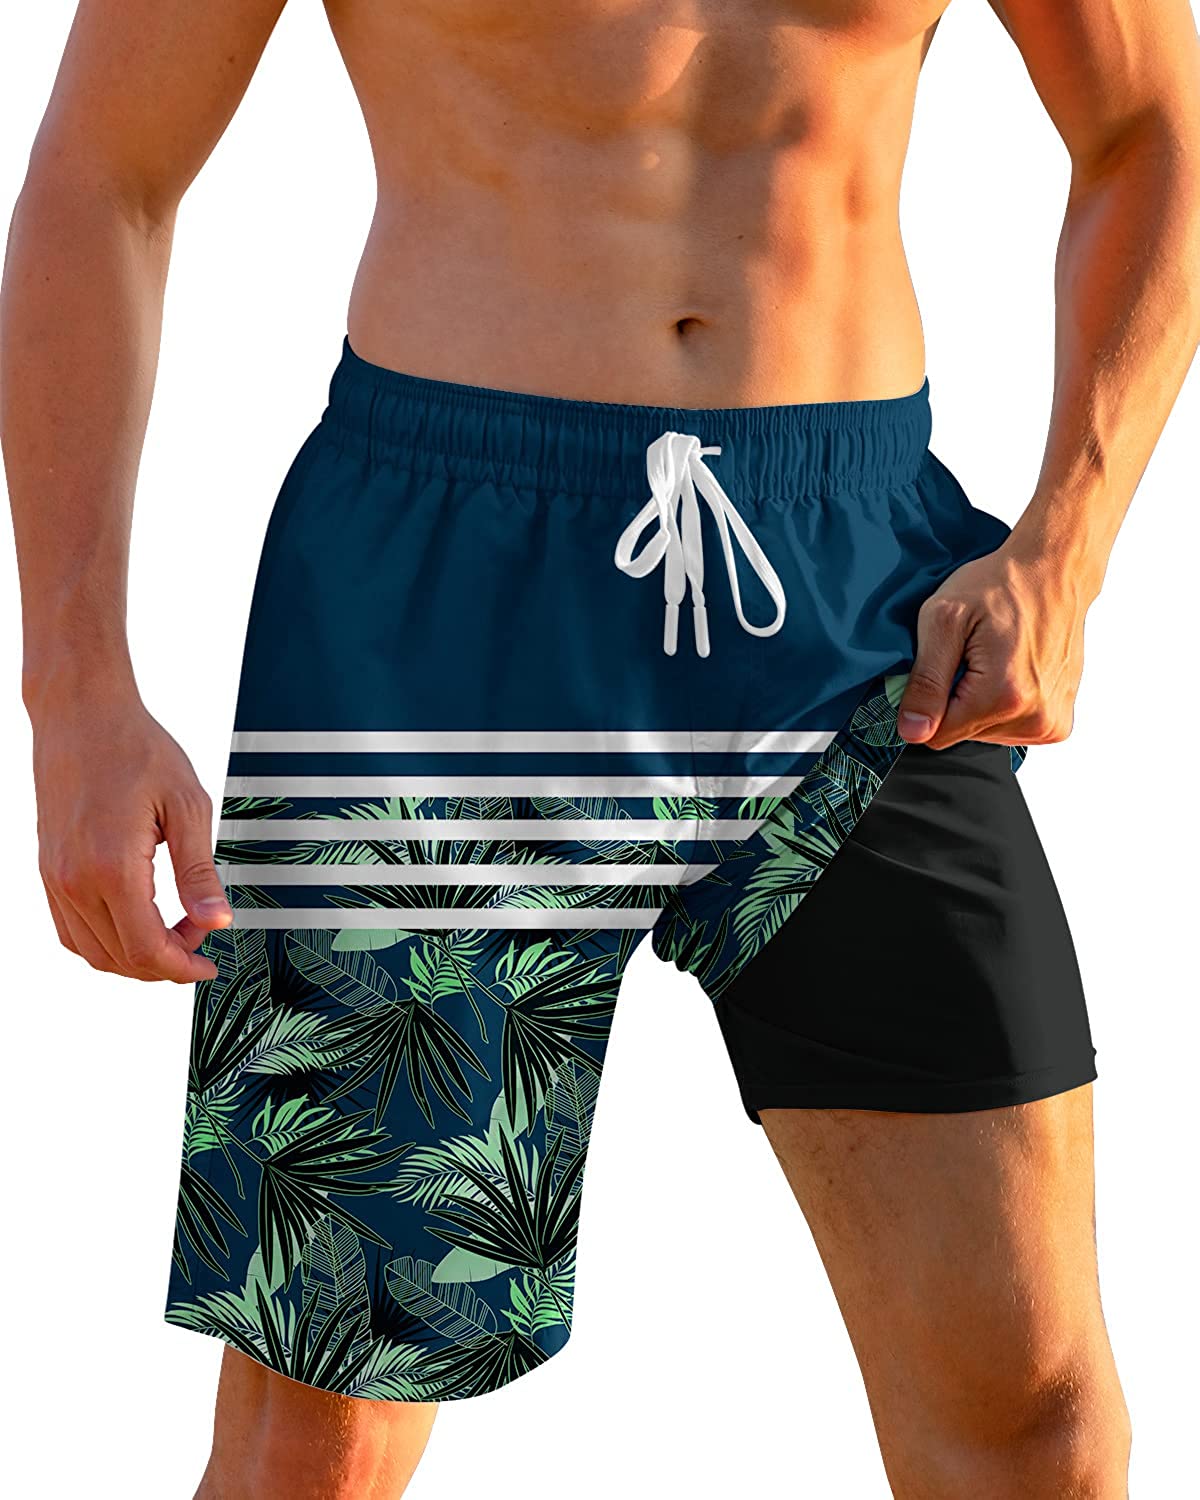 Cozople Mens Swim Trunks with Compression Liner 9 inch Bathing